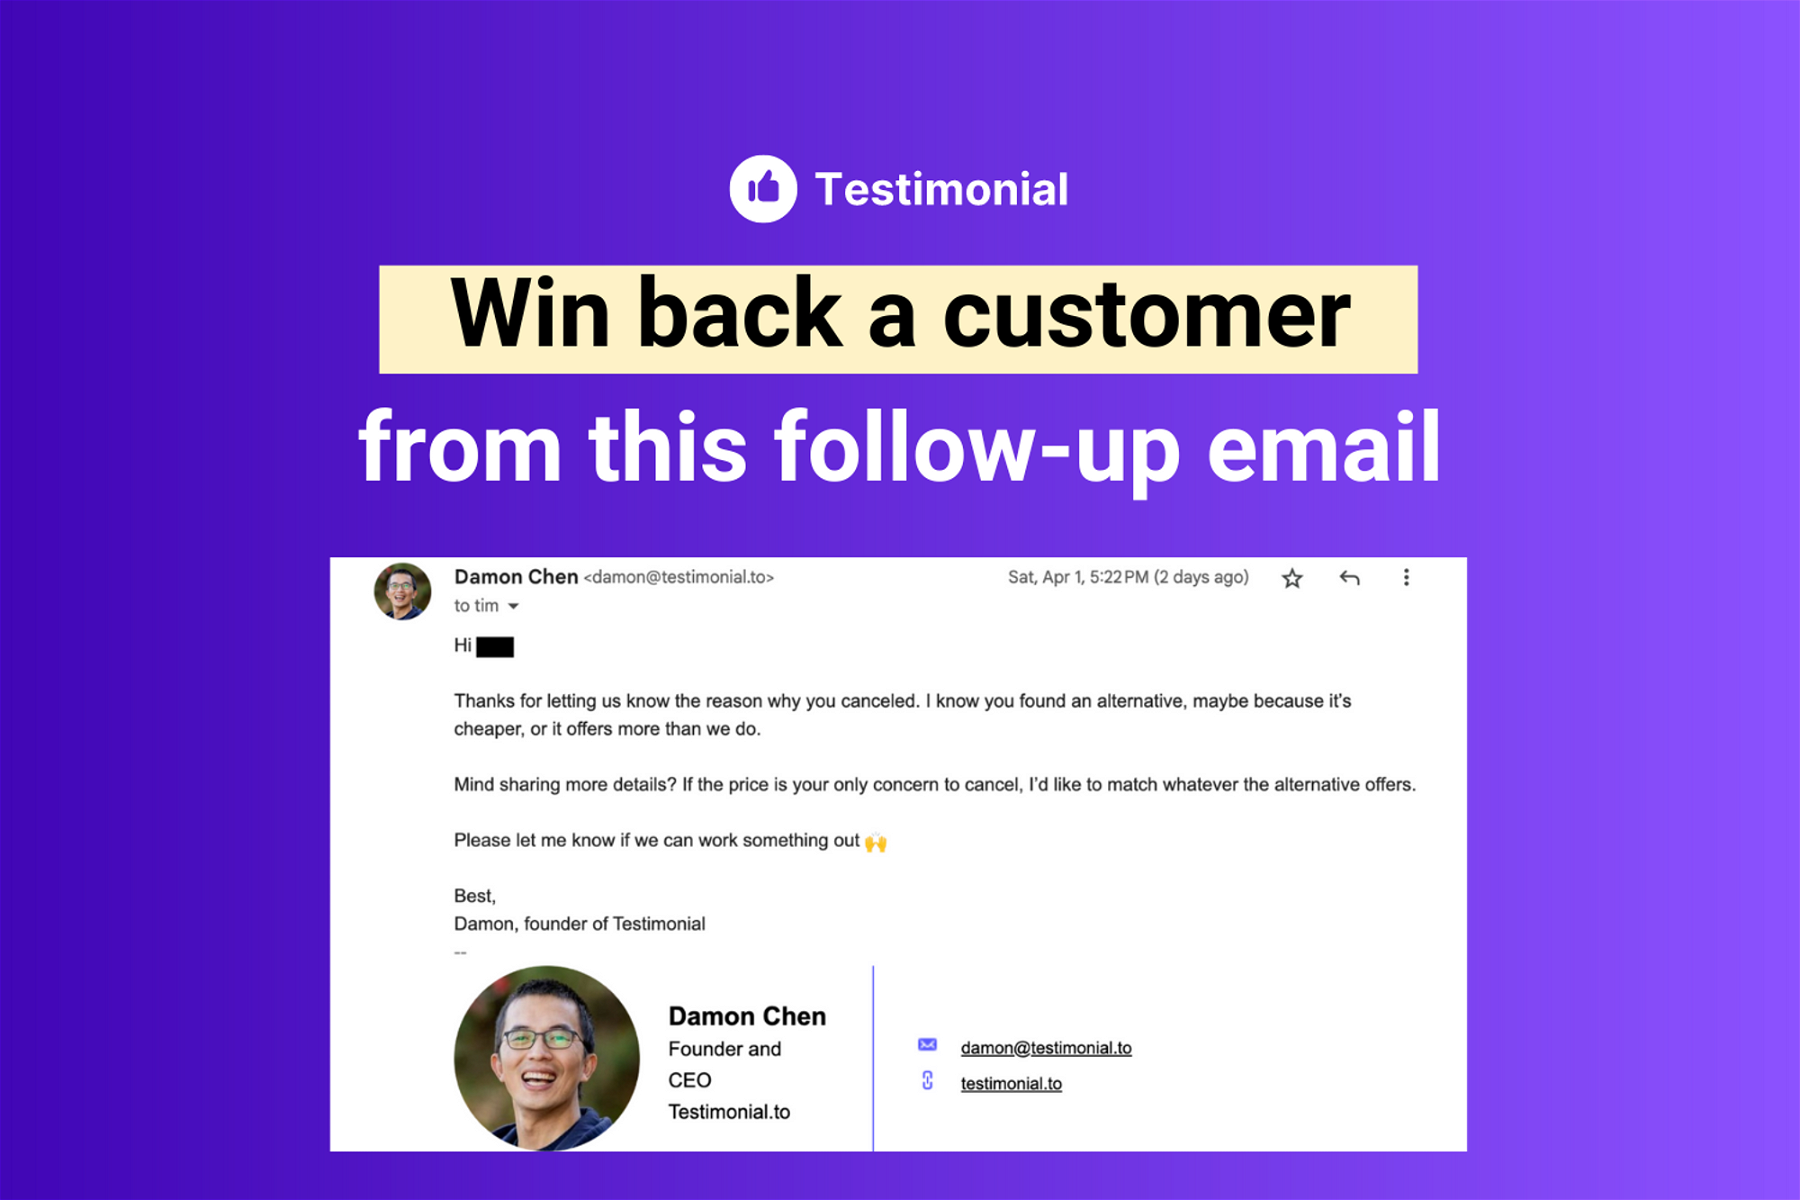 I use this email to win back a churned customer